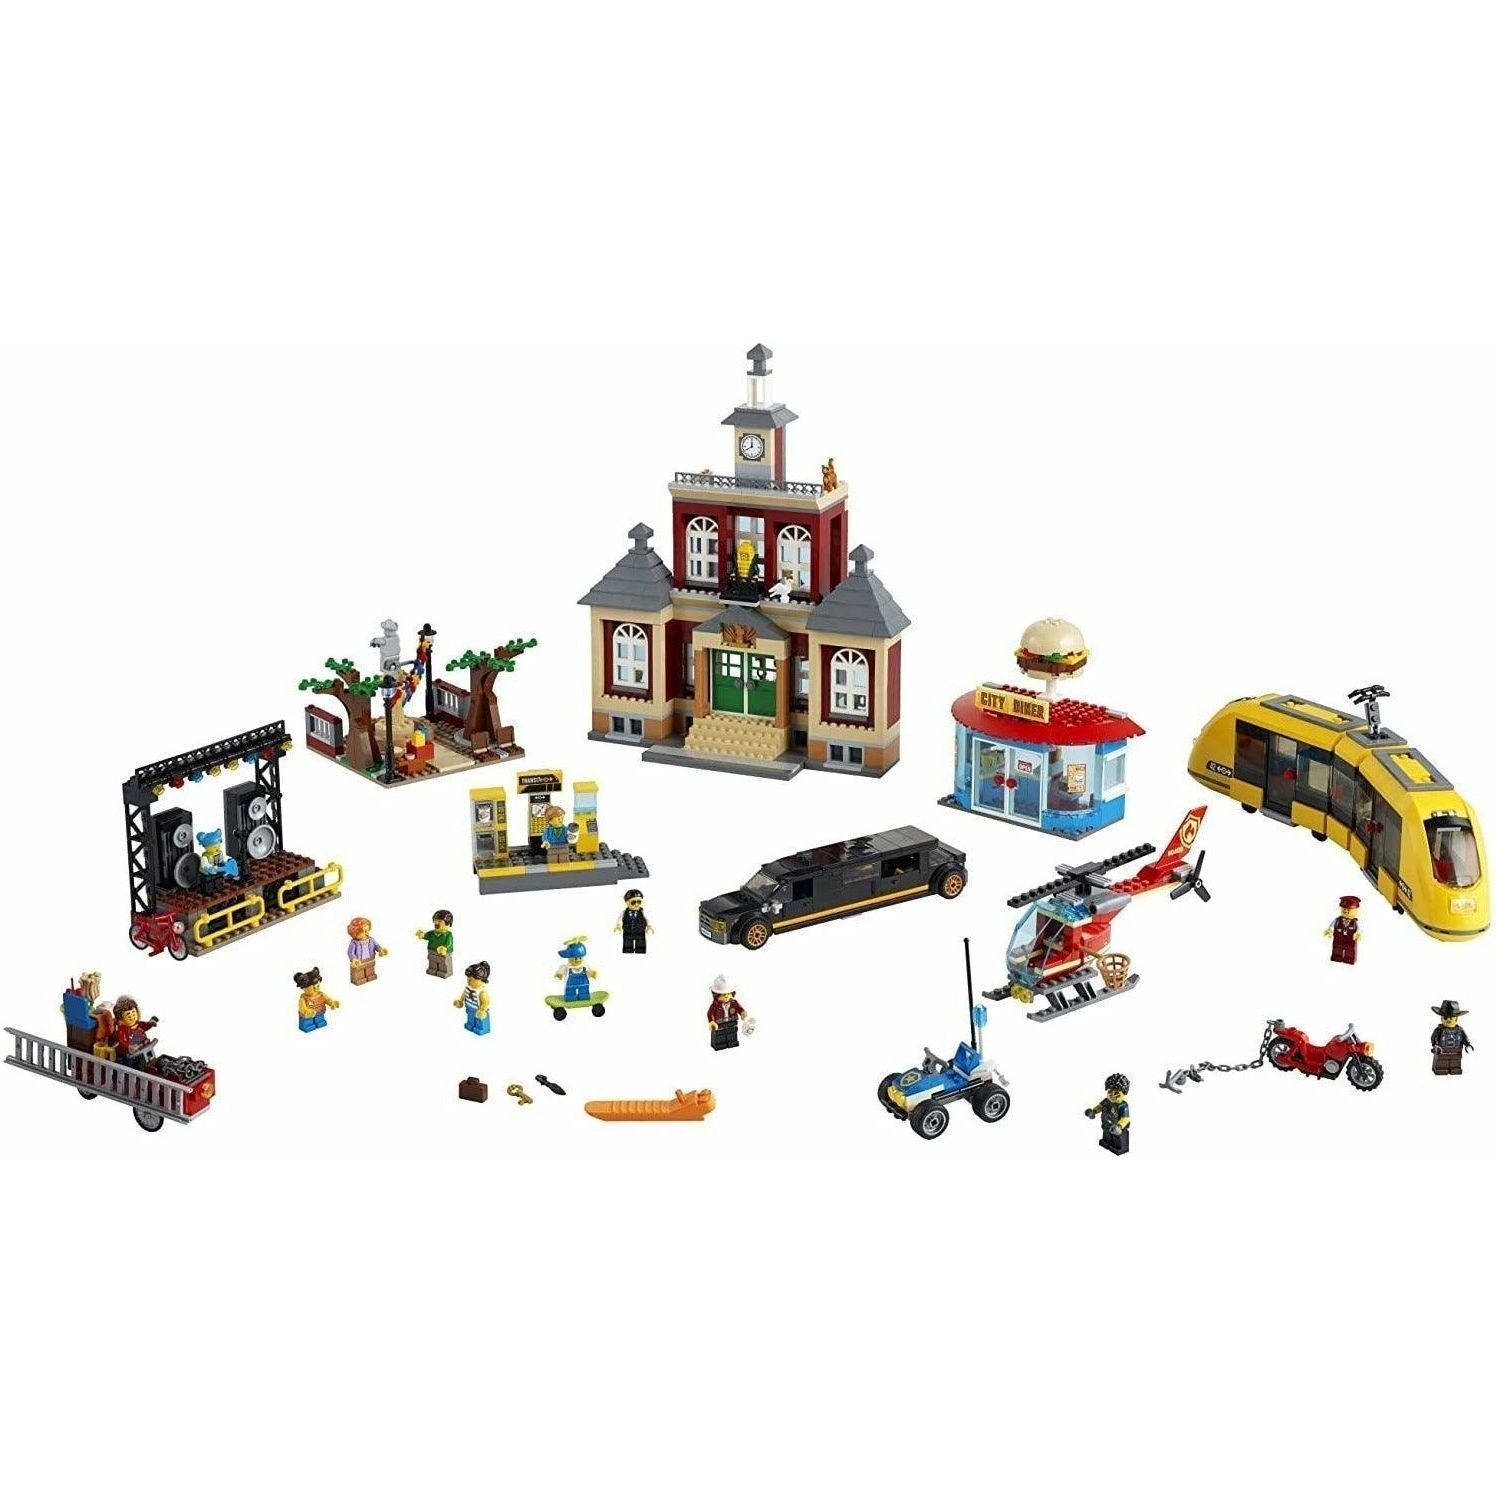 LEGO City Main Square 60271 Set, Cool Building Toy for Kids, New 2021 (1,517 Pieces) - BumbleToys - 5-7 Years, 6+ Years, Boys, City, LEGO, OXE, Pre-Order